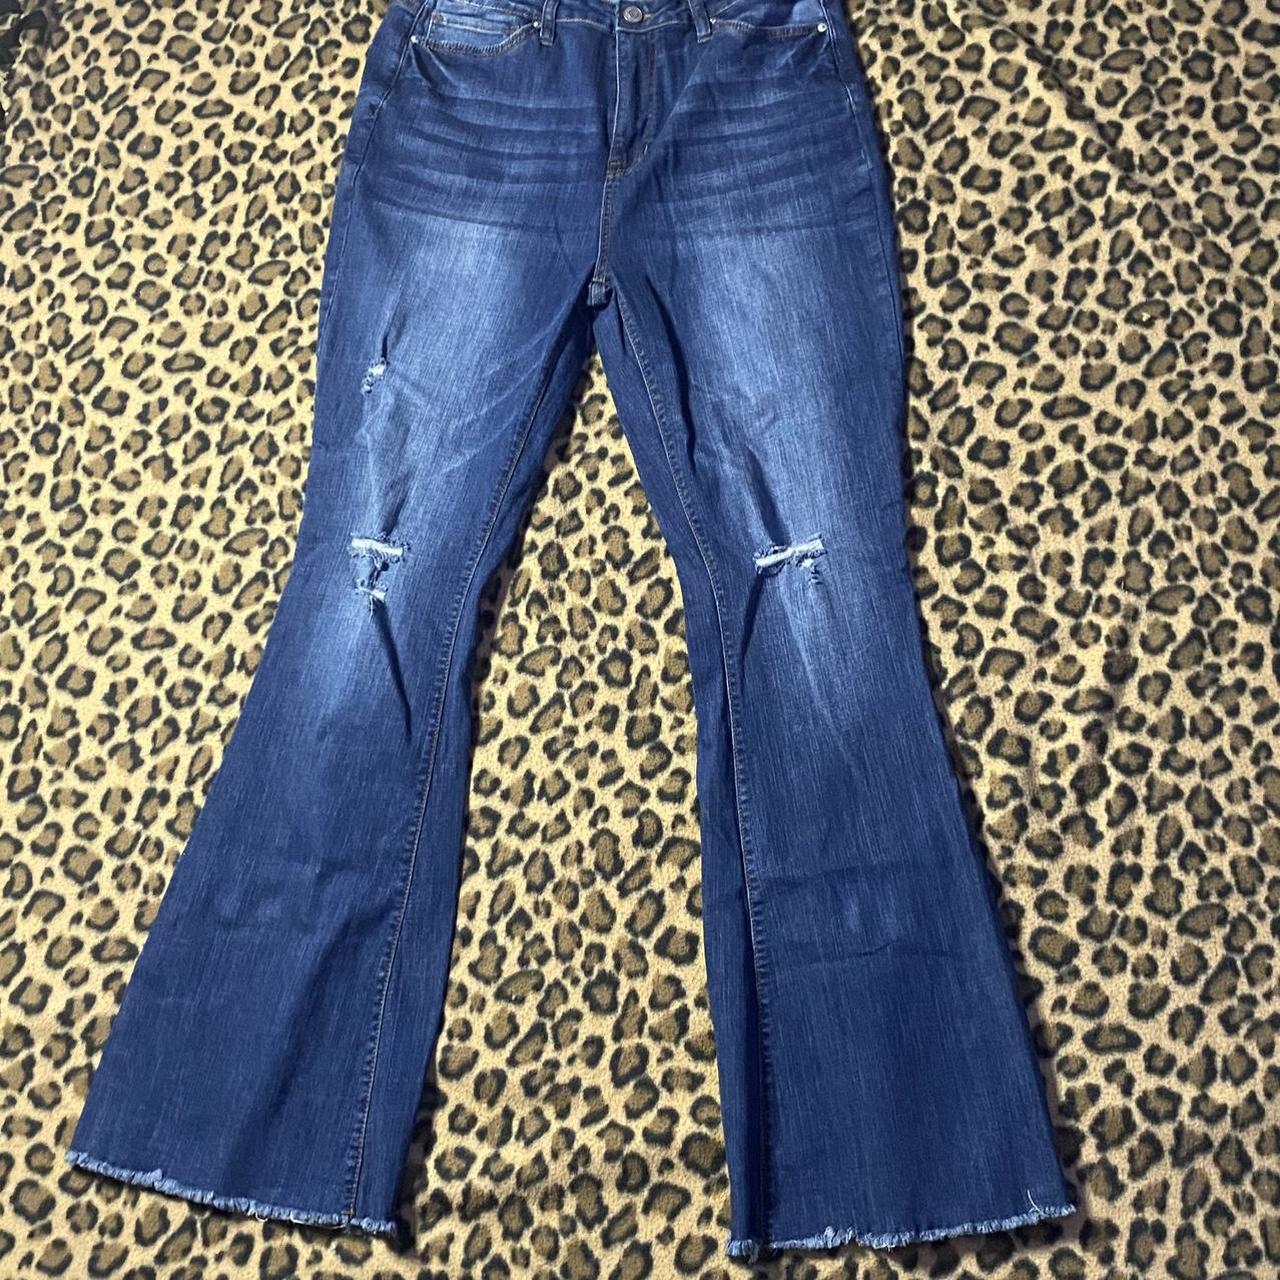 Flare jeans with rips size 17/33 Worn once so in... - Depop